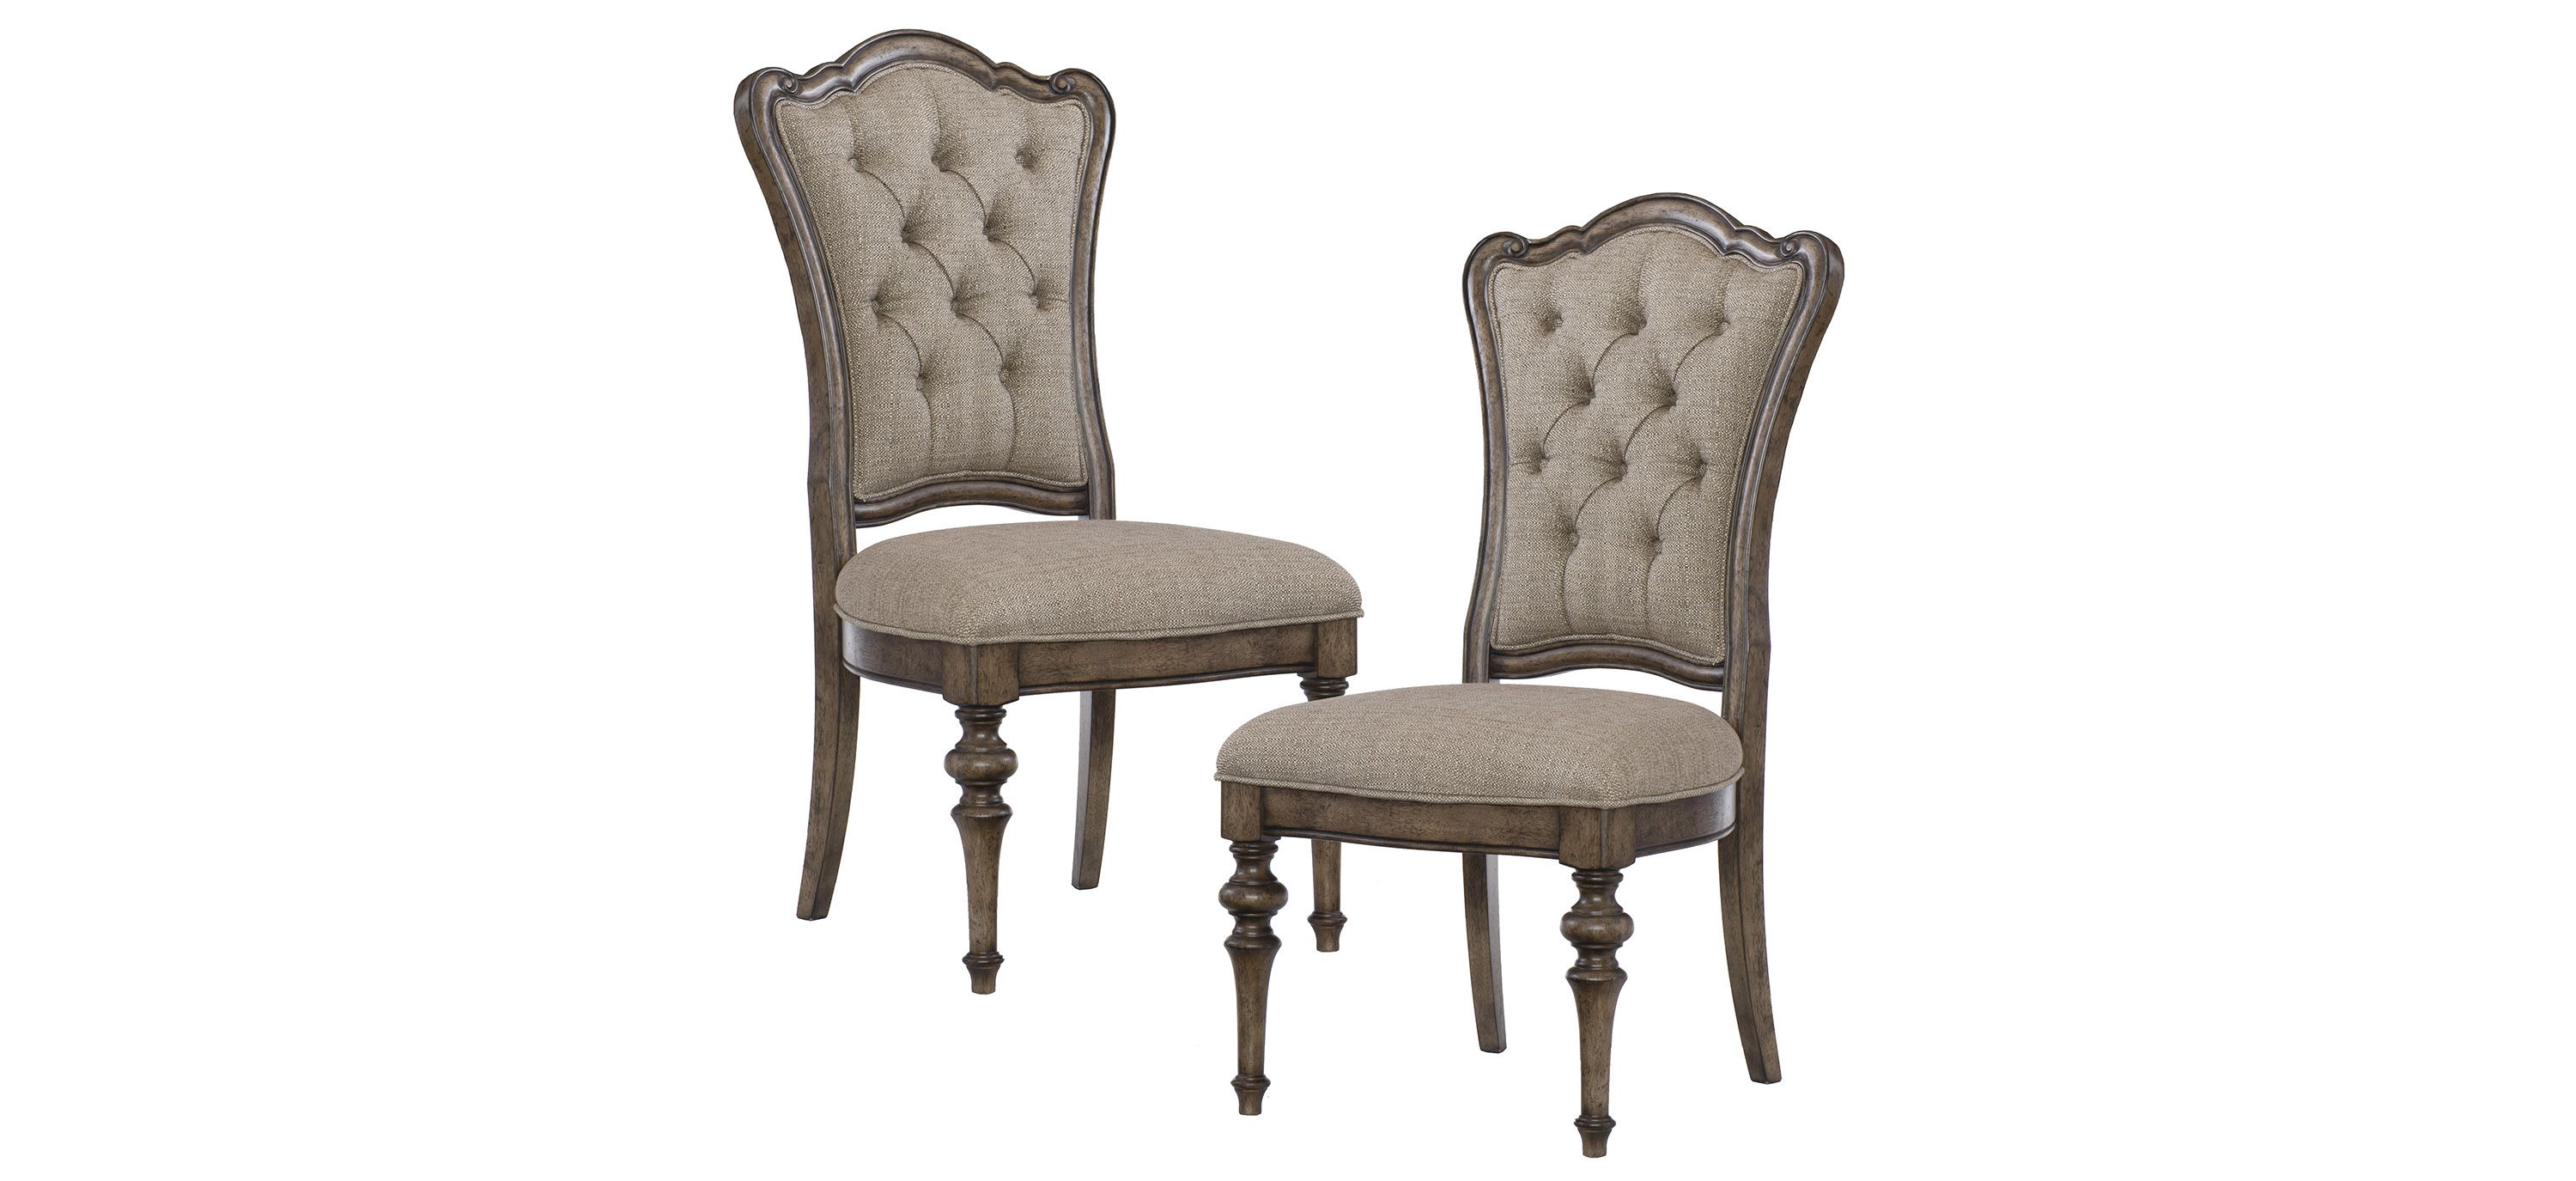 Moorewood Park Dining Side Chair, set of 2